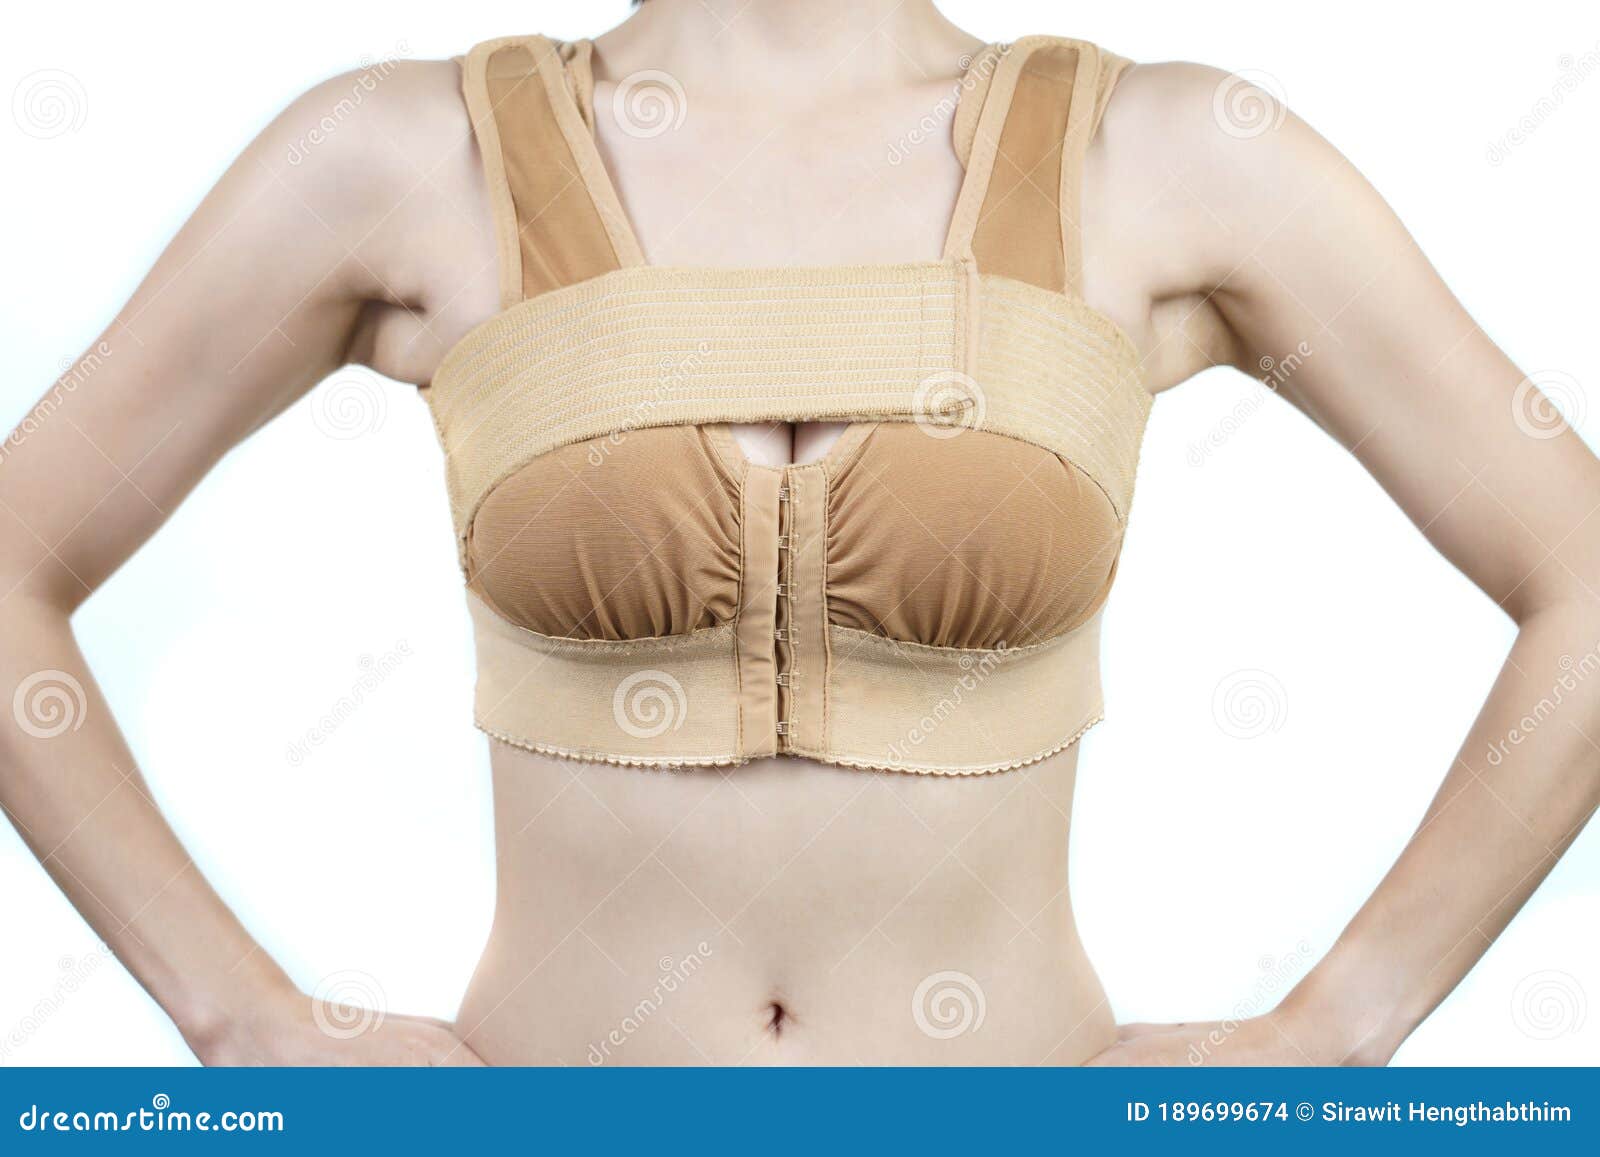 Woman posing in support bra after breast augmentation plastic surgery with  silicone breast implants. Stock Photo